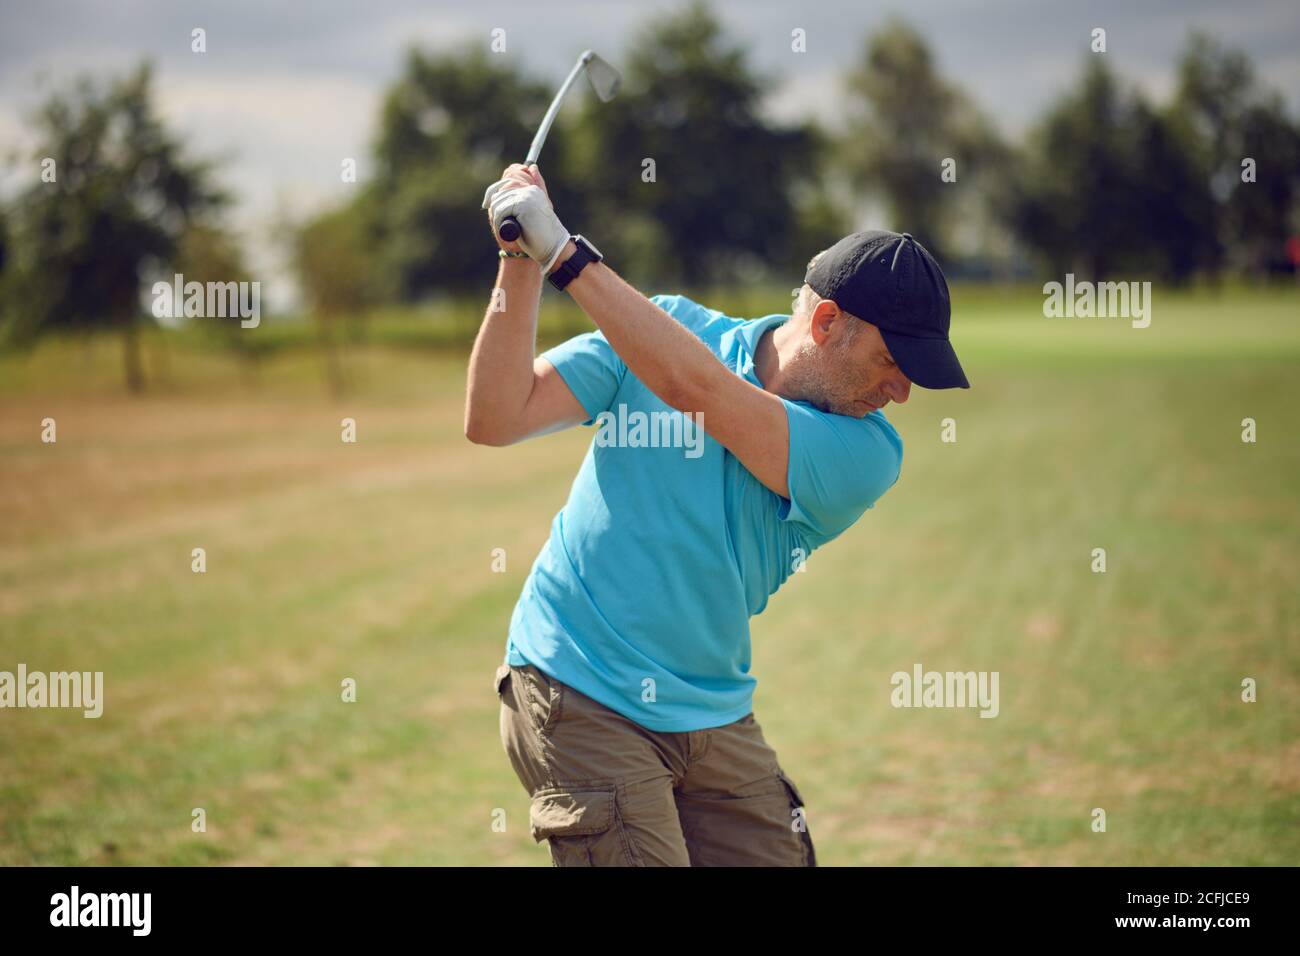 Man playing golf swinging at the ball as he plays his shot using a driver viewed from behind looking down the fairway in a healthy active lifestyle co Stock Photo